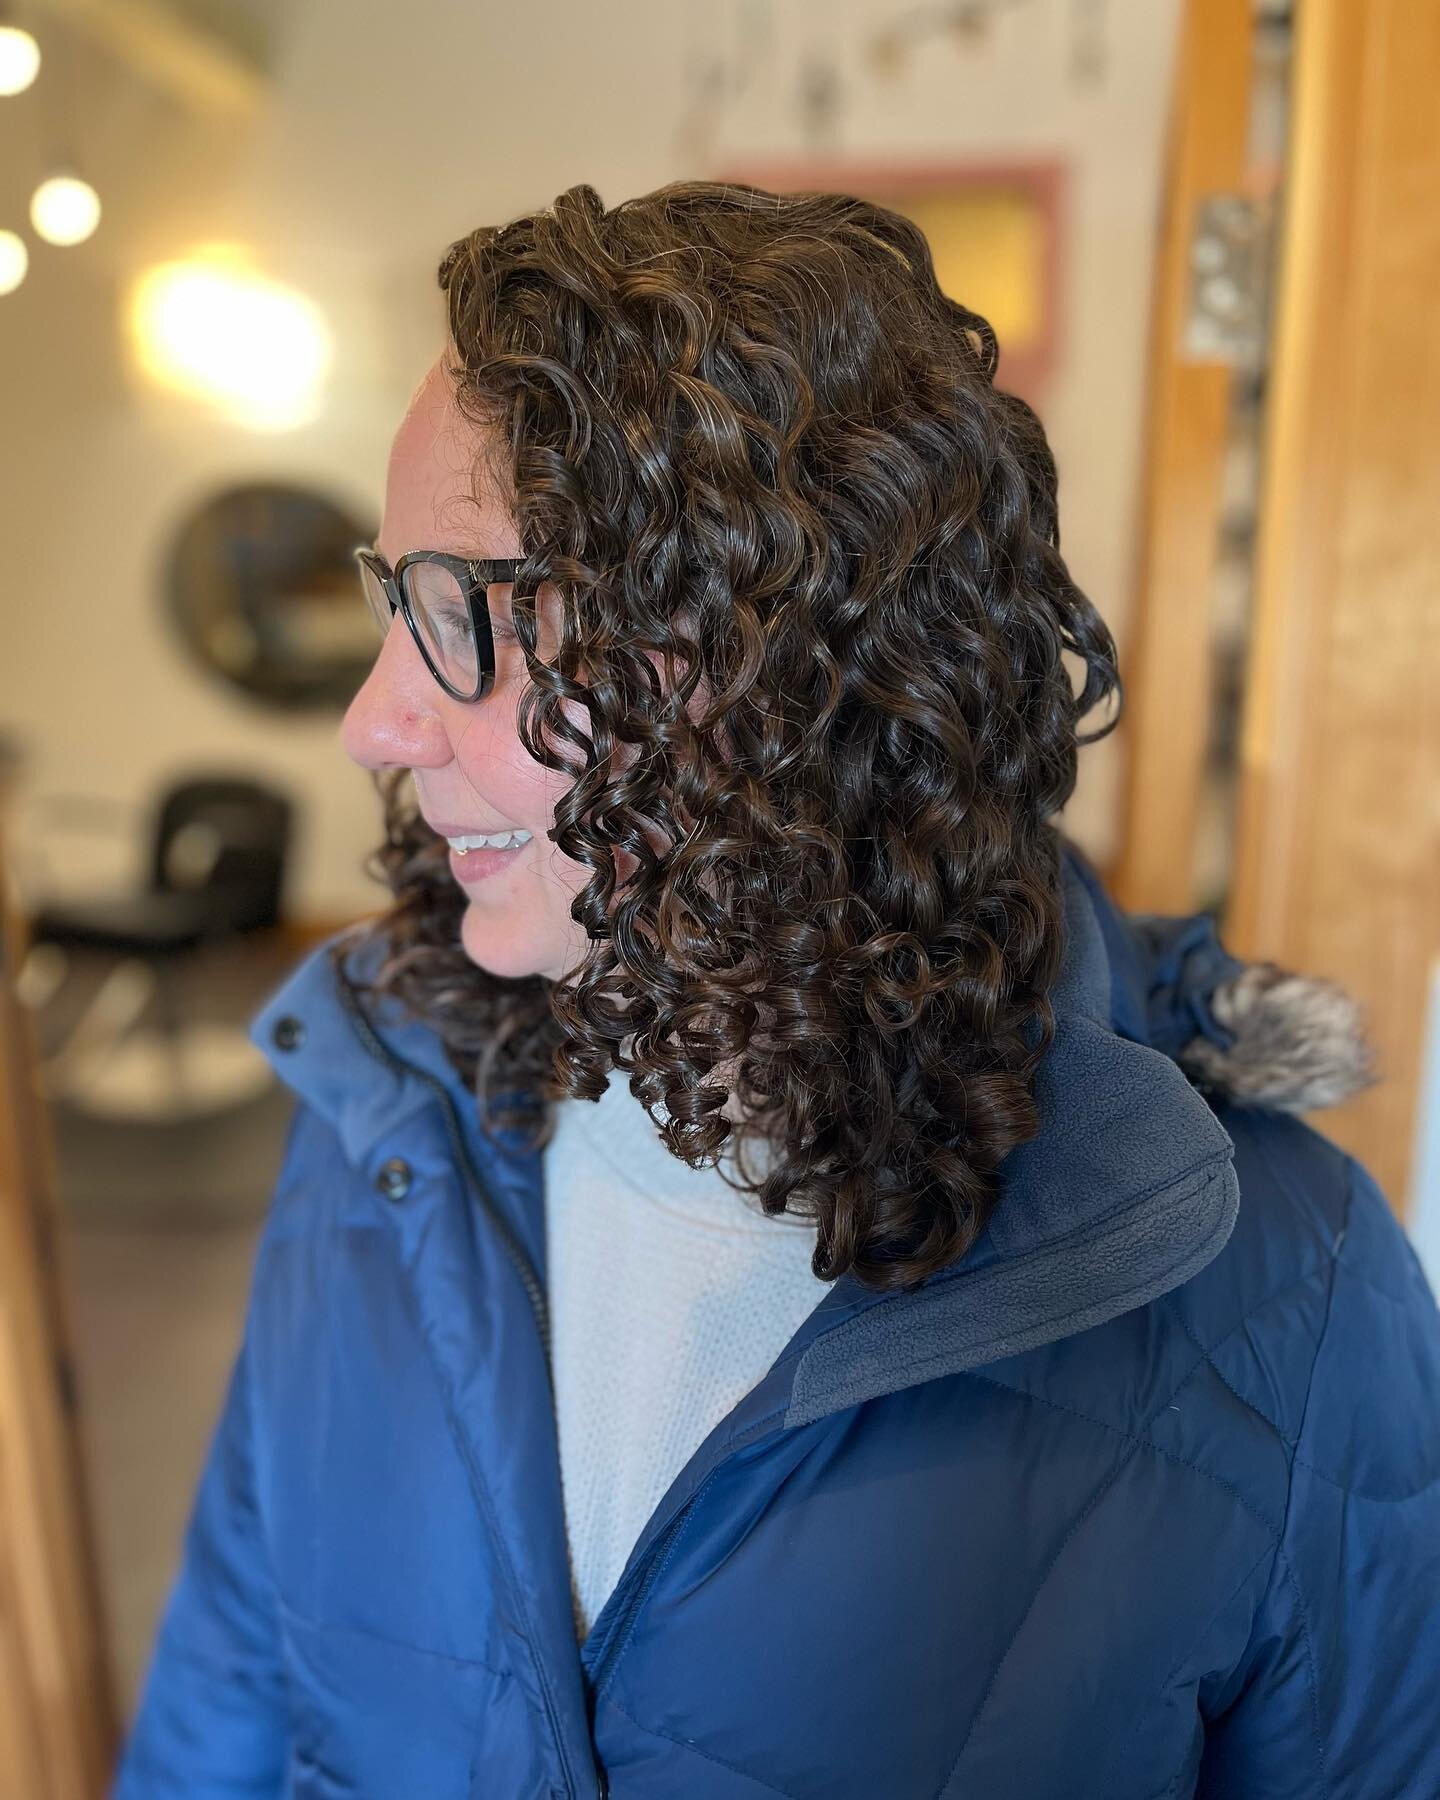 Gretchen&rsquo;s curls are amazing! So I had to take the opportunity to actually snap a quick photo for my instagram to let y&rsquo;all know I&rsquo;m alive and still doing awesome hair! 😄